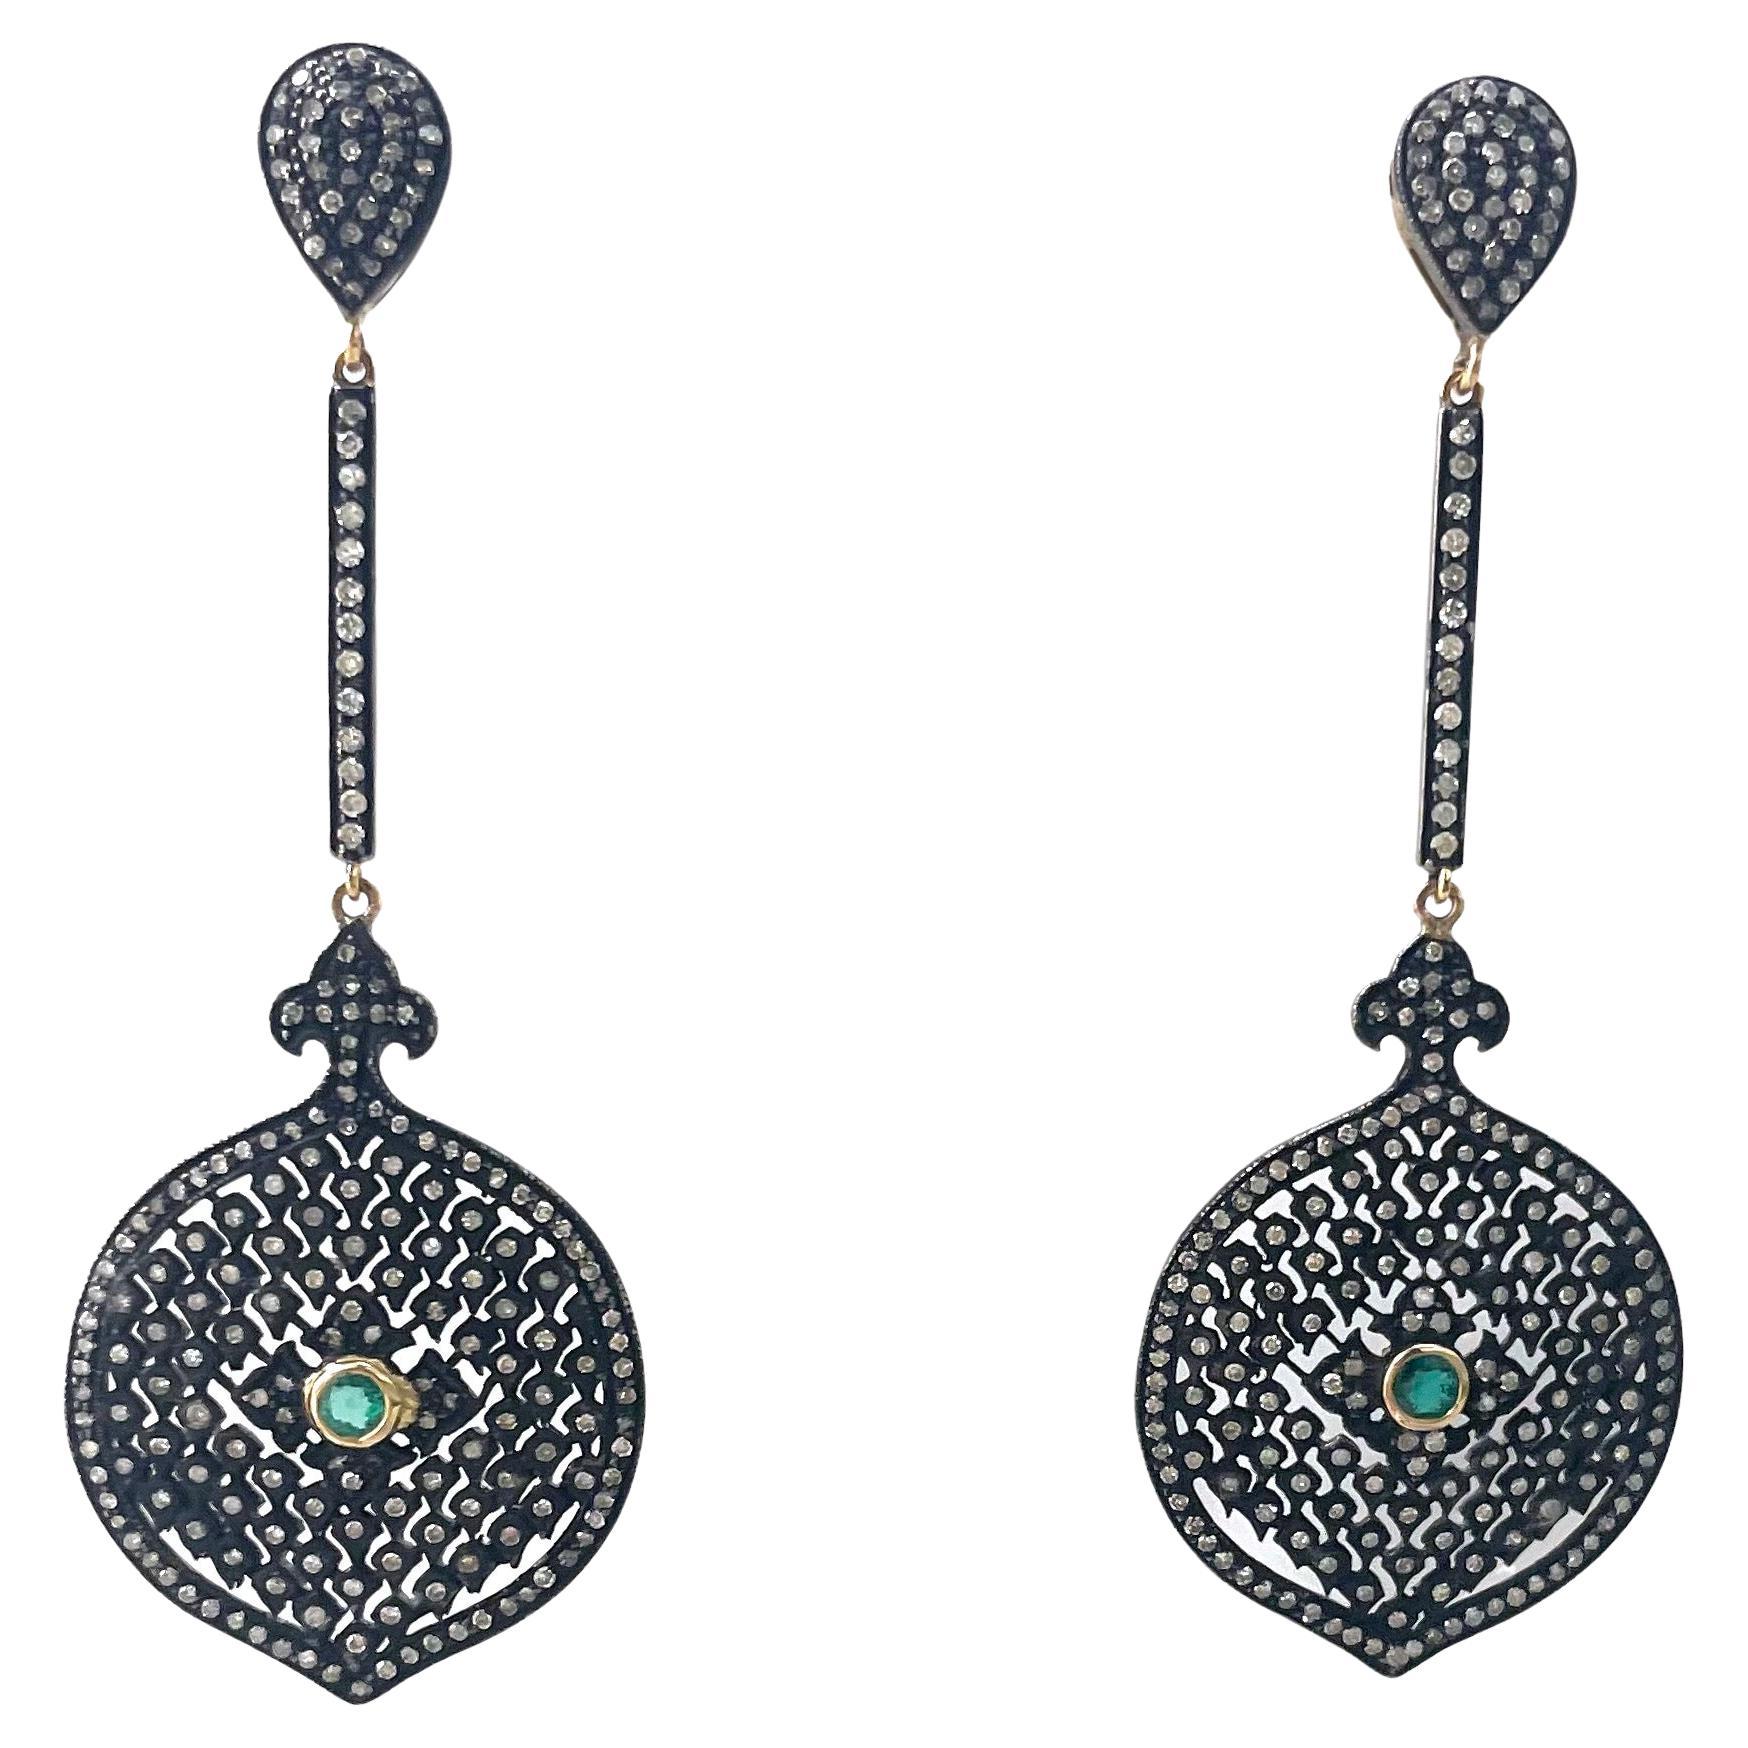 Description
Delicate diamond studded openwork filigree black earring, accented with a vibrant green Emerald center. The beautiful filigree medallions are suspended from a pave diamond bar and pear shape ear post. Item #E3129

Materials and